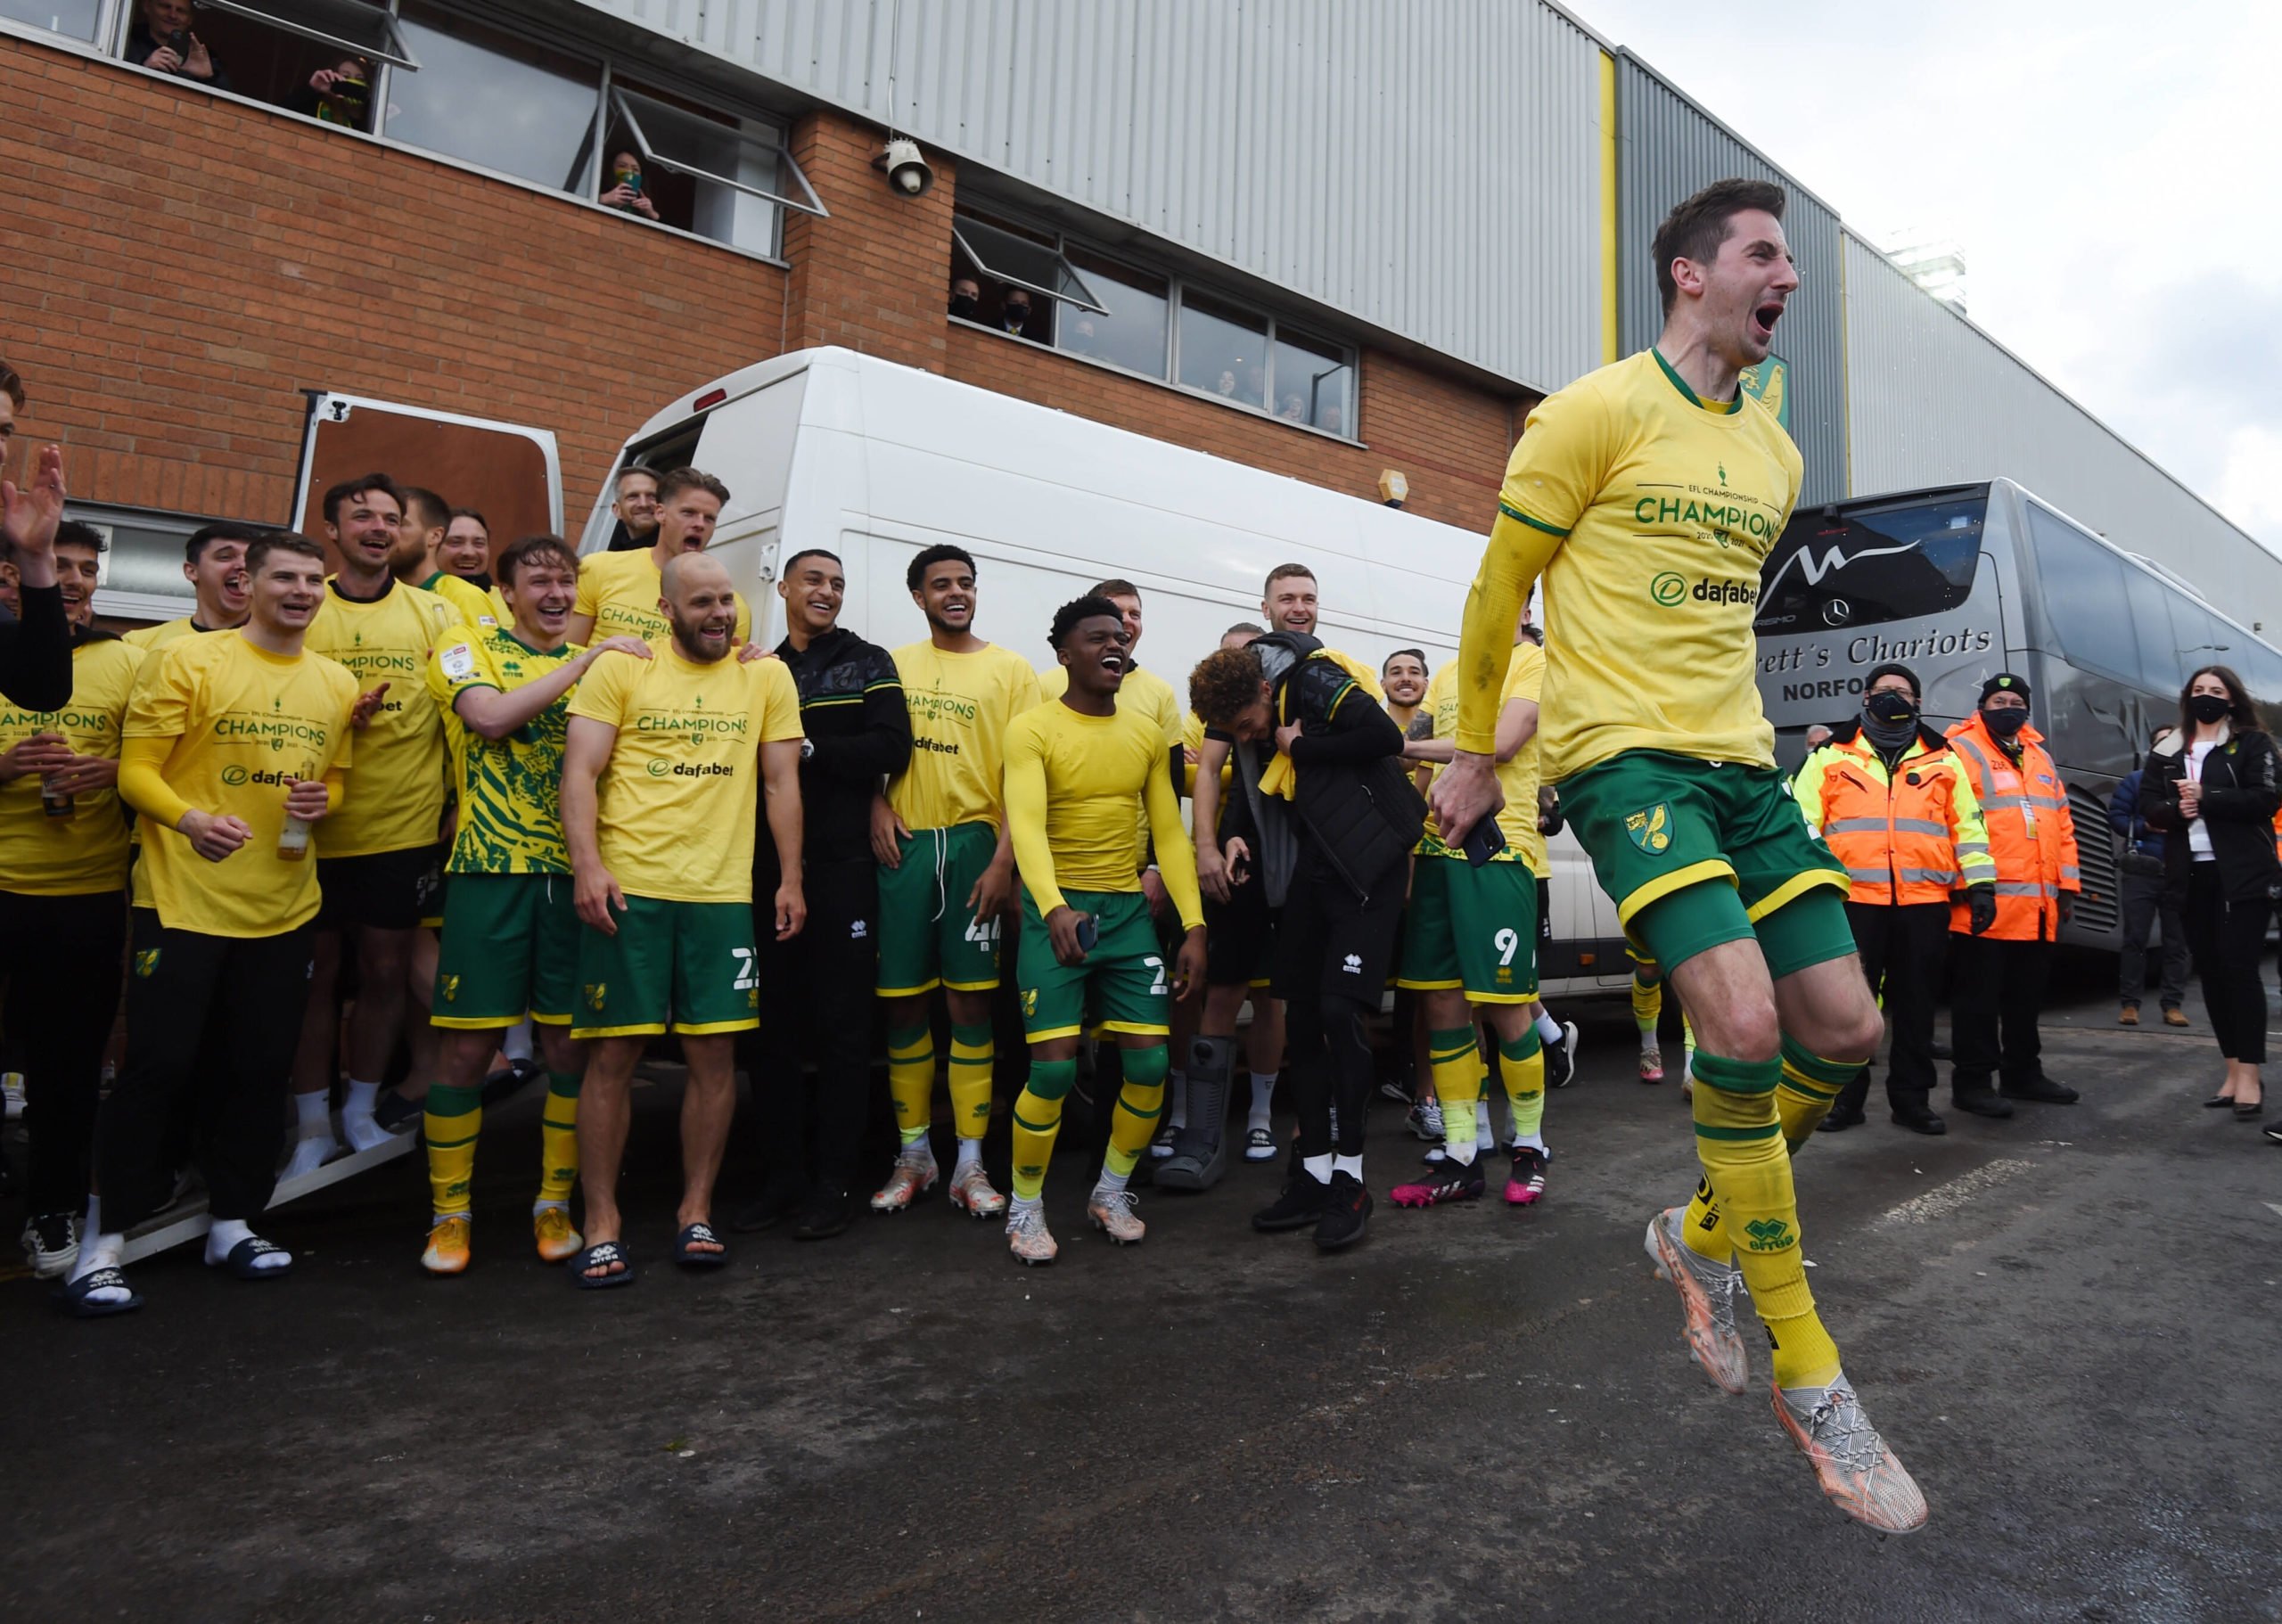 Fußball, Norwich City bejubelt 1. Platz in der Sky Bet Championship  Norwich City v Reading - Sky Bet Championship - Carrow Road Norwich City s Kenny McLean and players celebrate outside with fans after being crowned champions during the Sky Bet Championship match at Carrow Road, Norwich. Issue date: Saturday May 1, 2021. EDITORIAL USE ONLY No use with unauthorised audio, video, data, fixture lists, club/league logos or live services. Online in-match use limited to 120 images, no video emulation. No use in betting, games or single club/league/player publications. PUBLICATIONxINxGERxSUIxAUTxONLY Copyright: xJoexGiddensx 59512065